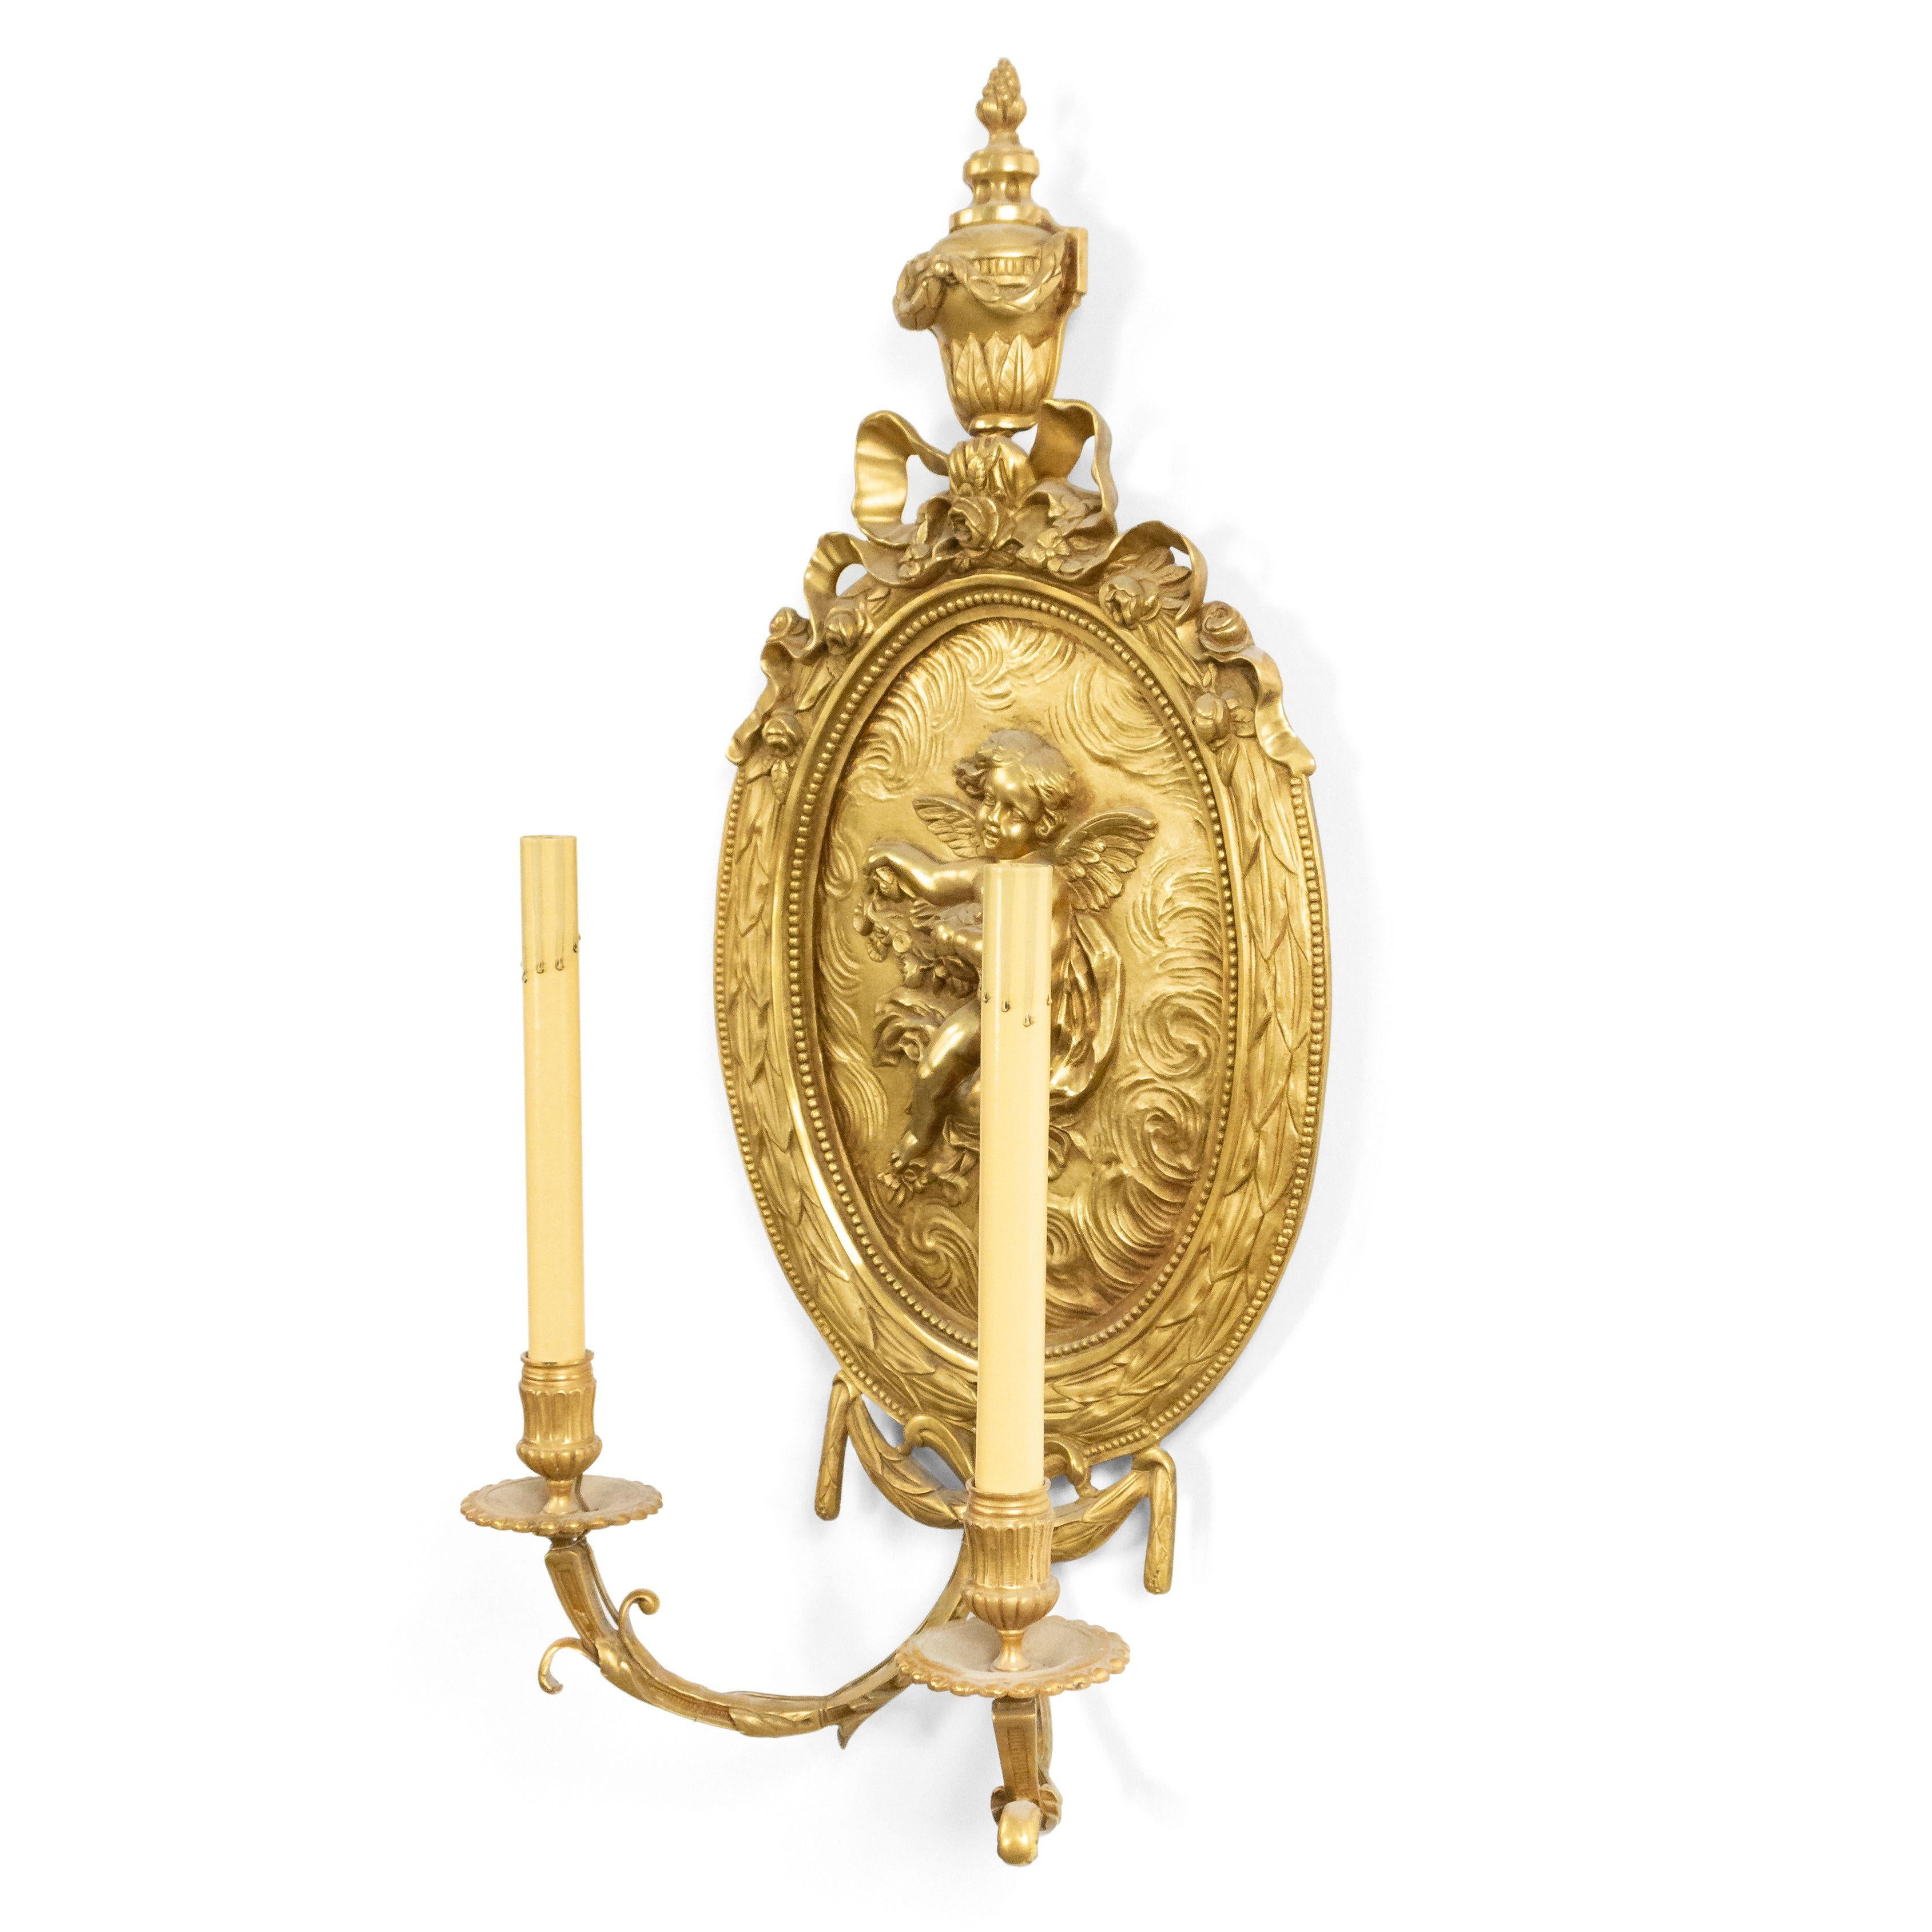 Pair of French Louis XV (19th century) bronze doré 2 arm wall sconces with oval plaque back with cupids in relief and finial top.